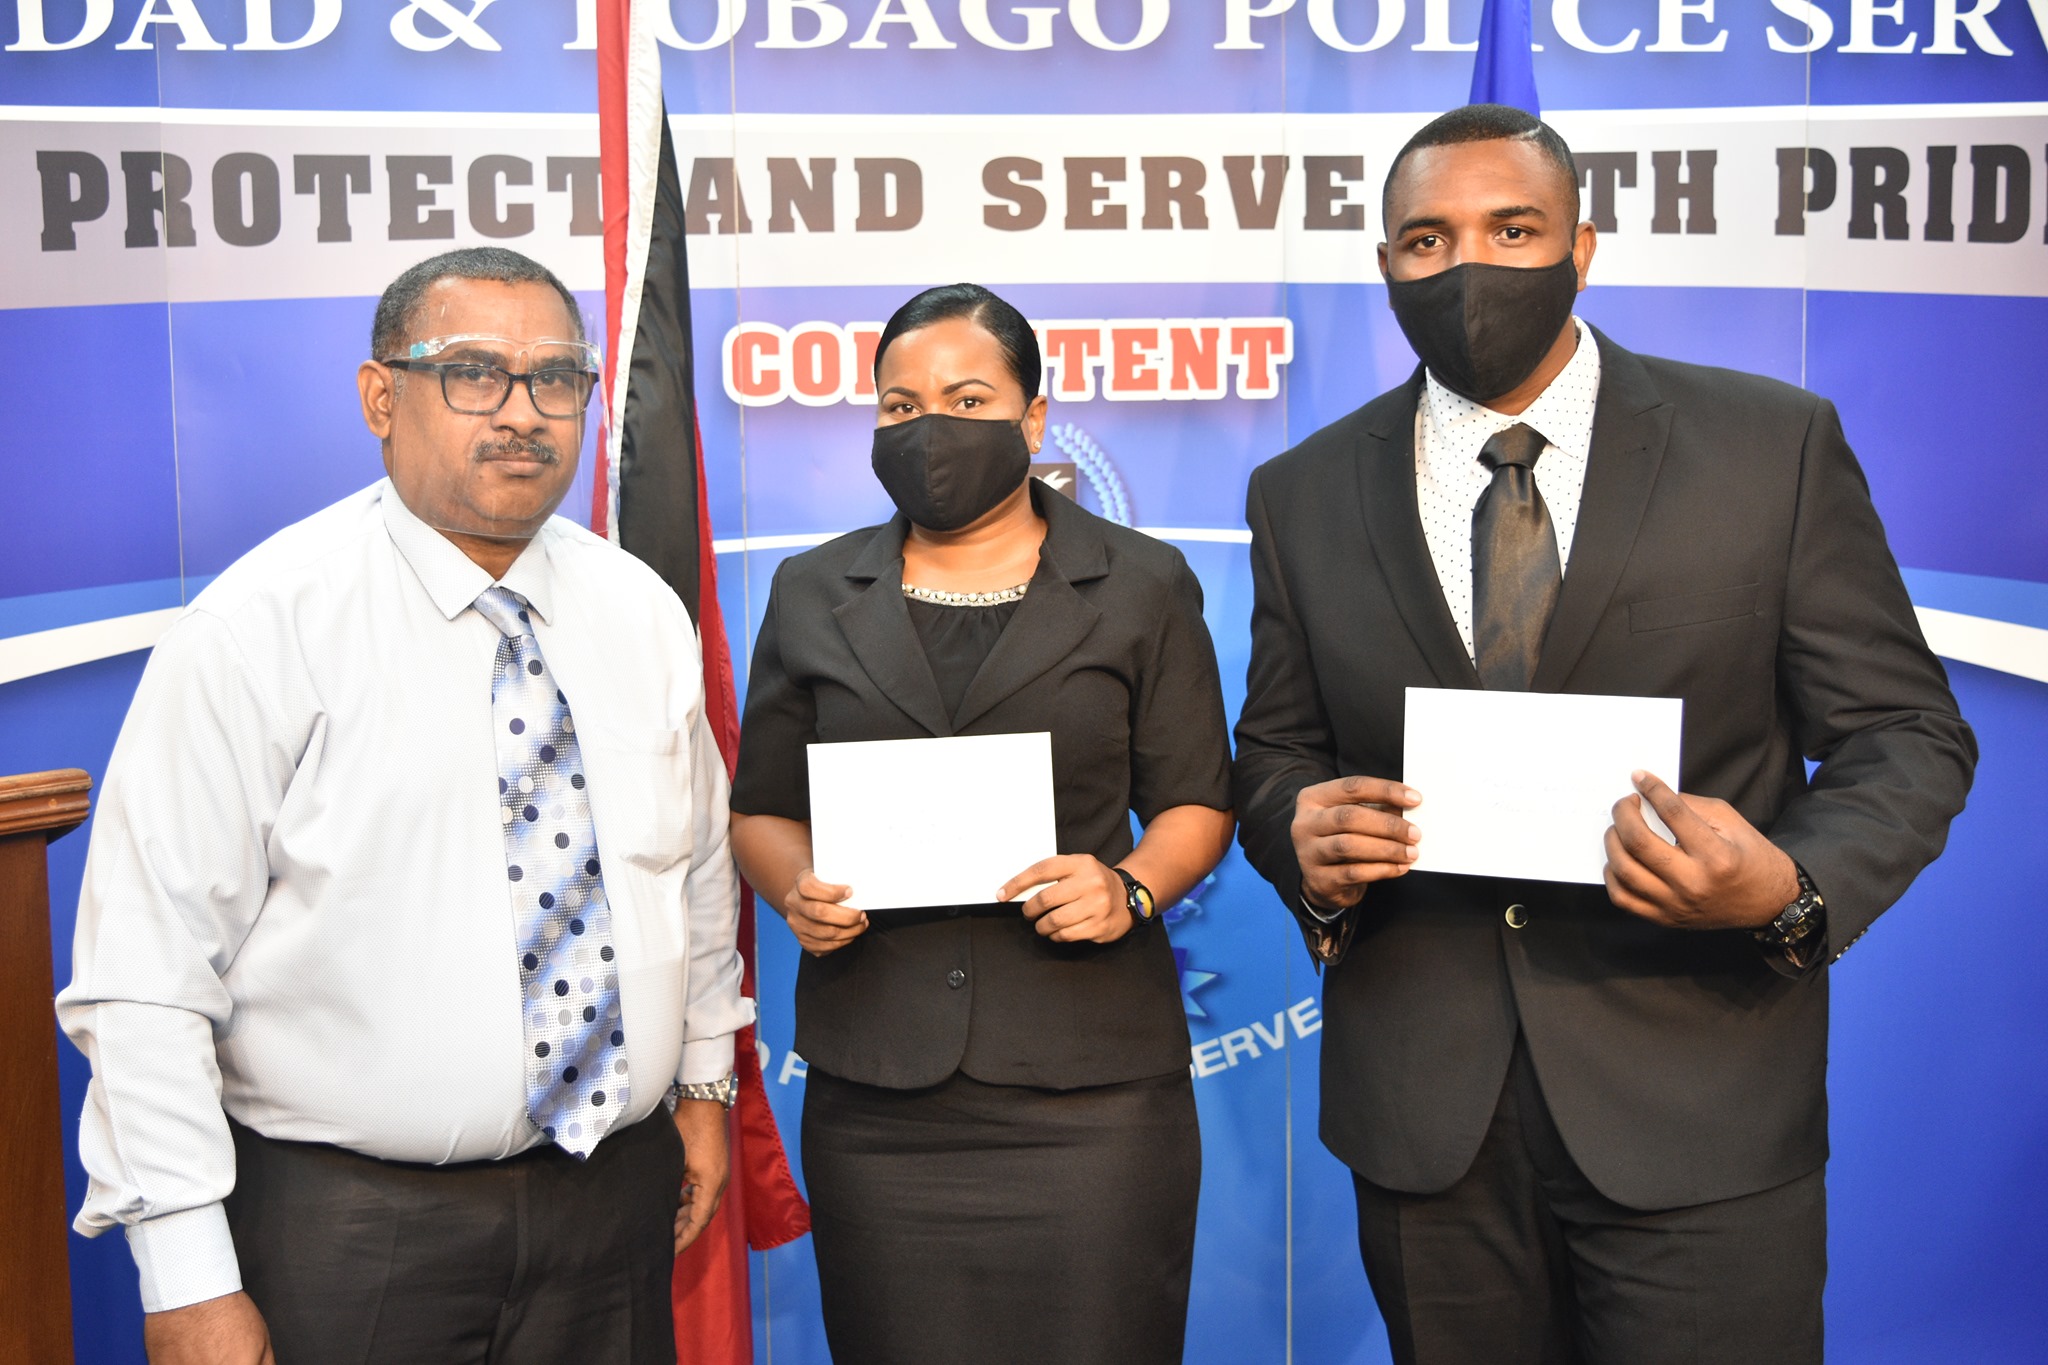 Two police officers rewarded for outstanding service